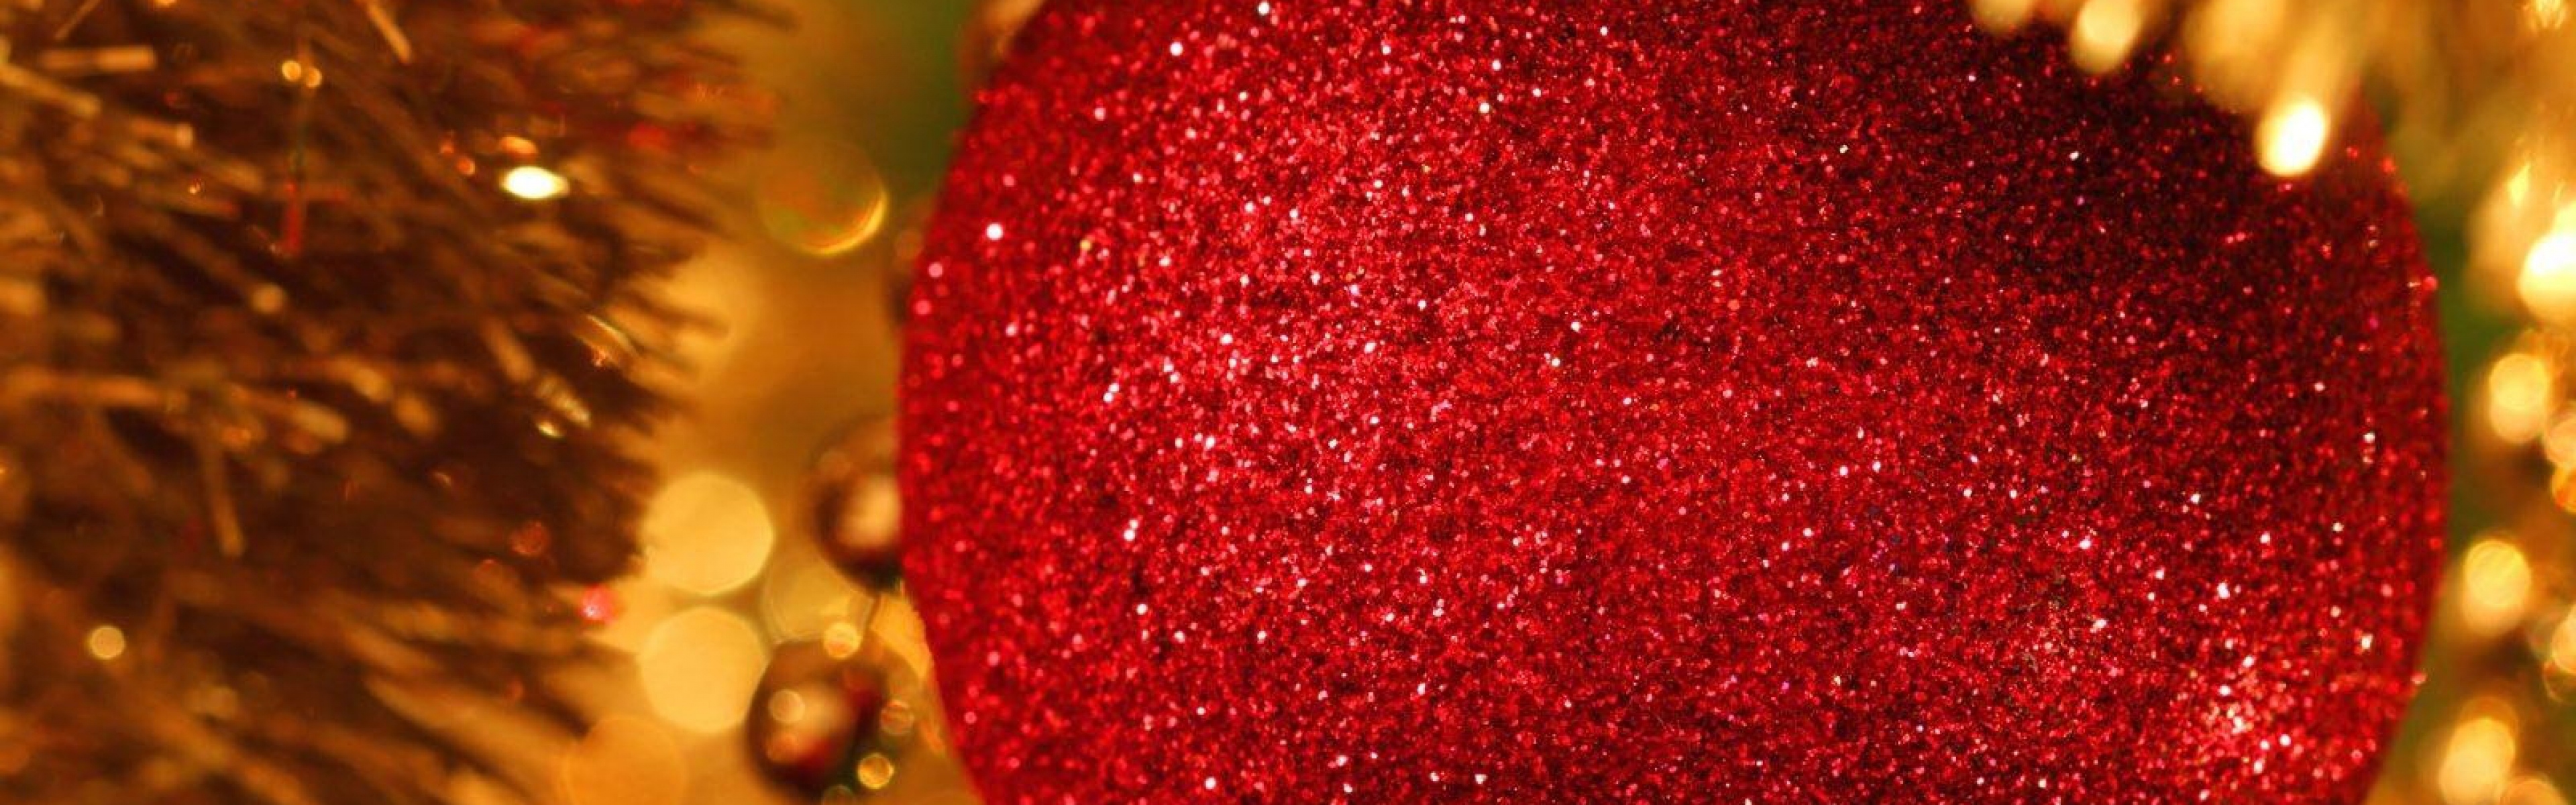 Download Wallpaper 3840x1200 Christmas decorations, Tinsel, New ...